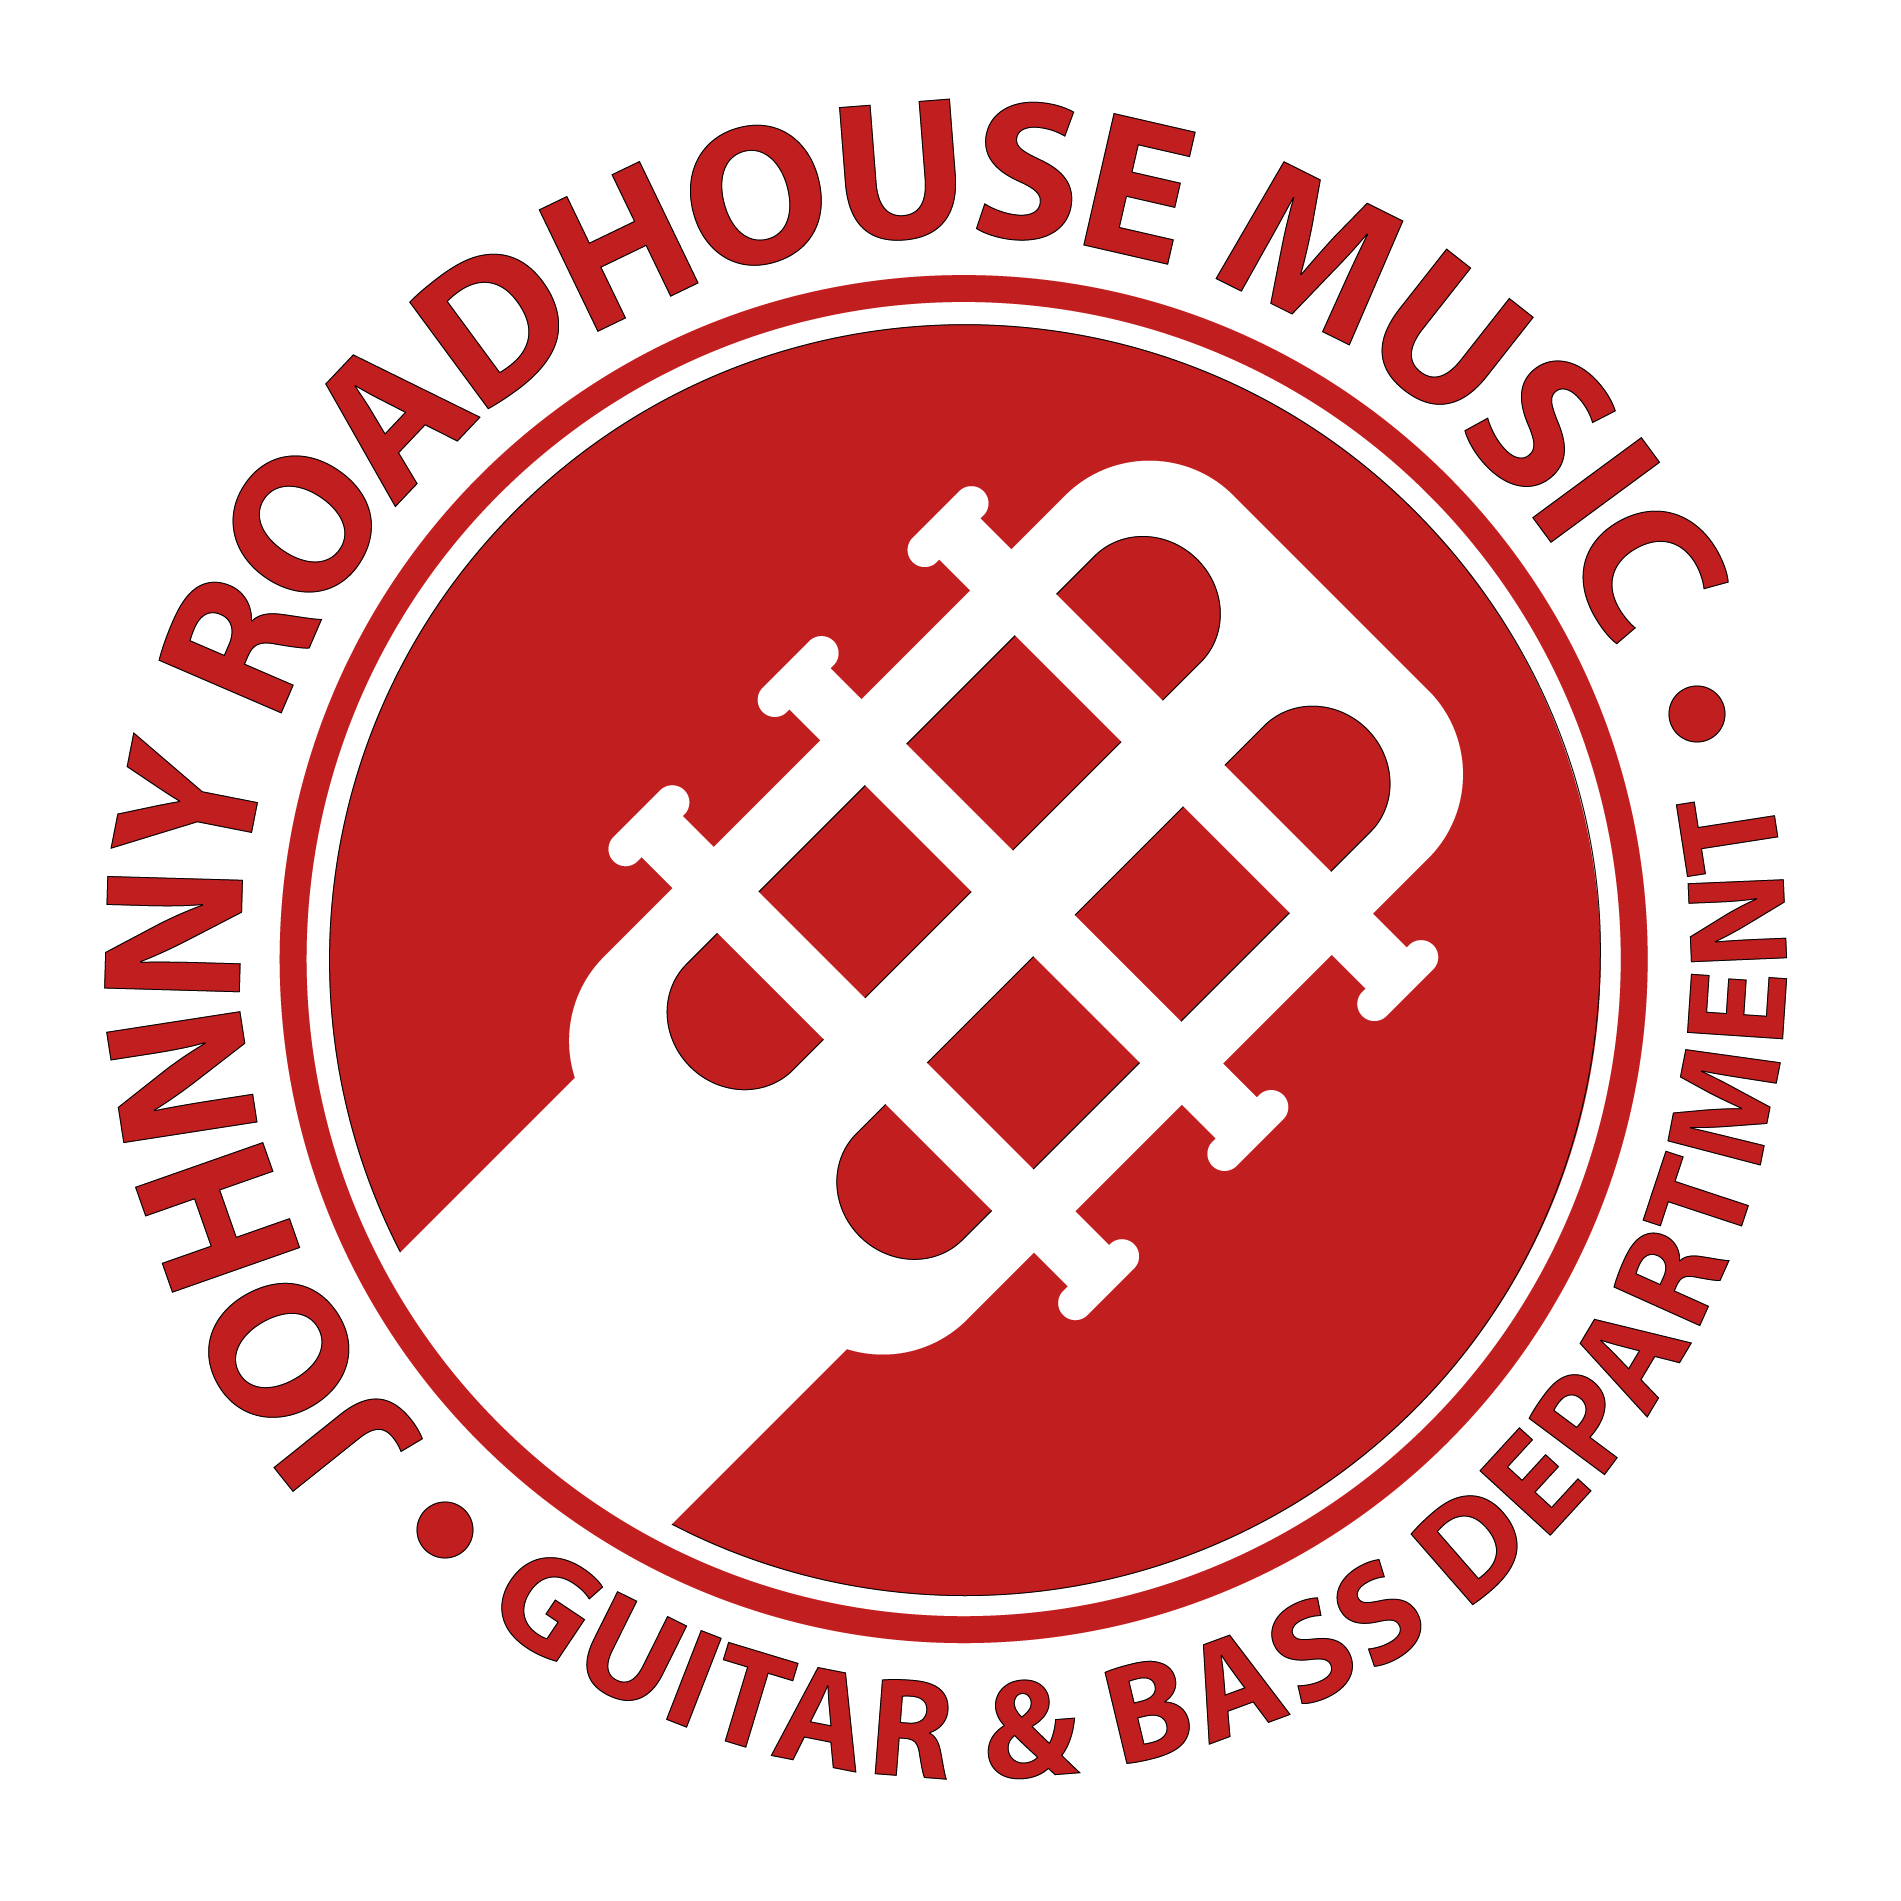 Johnny Roadhouse Music - Guitar & Bass Department